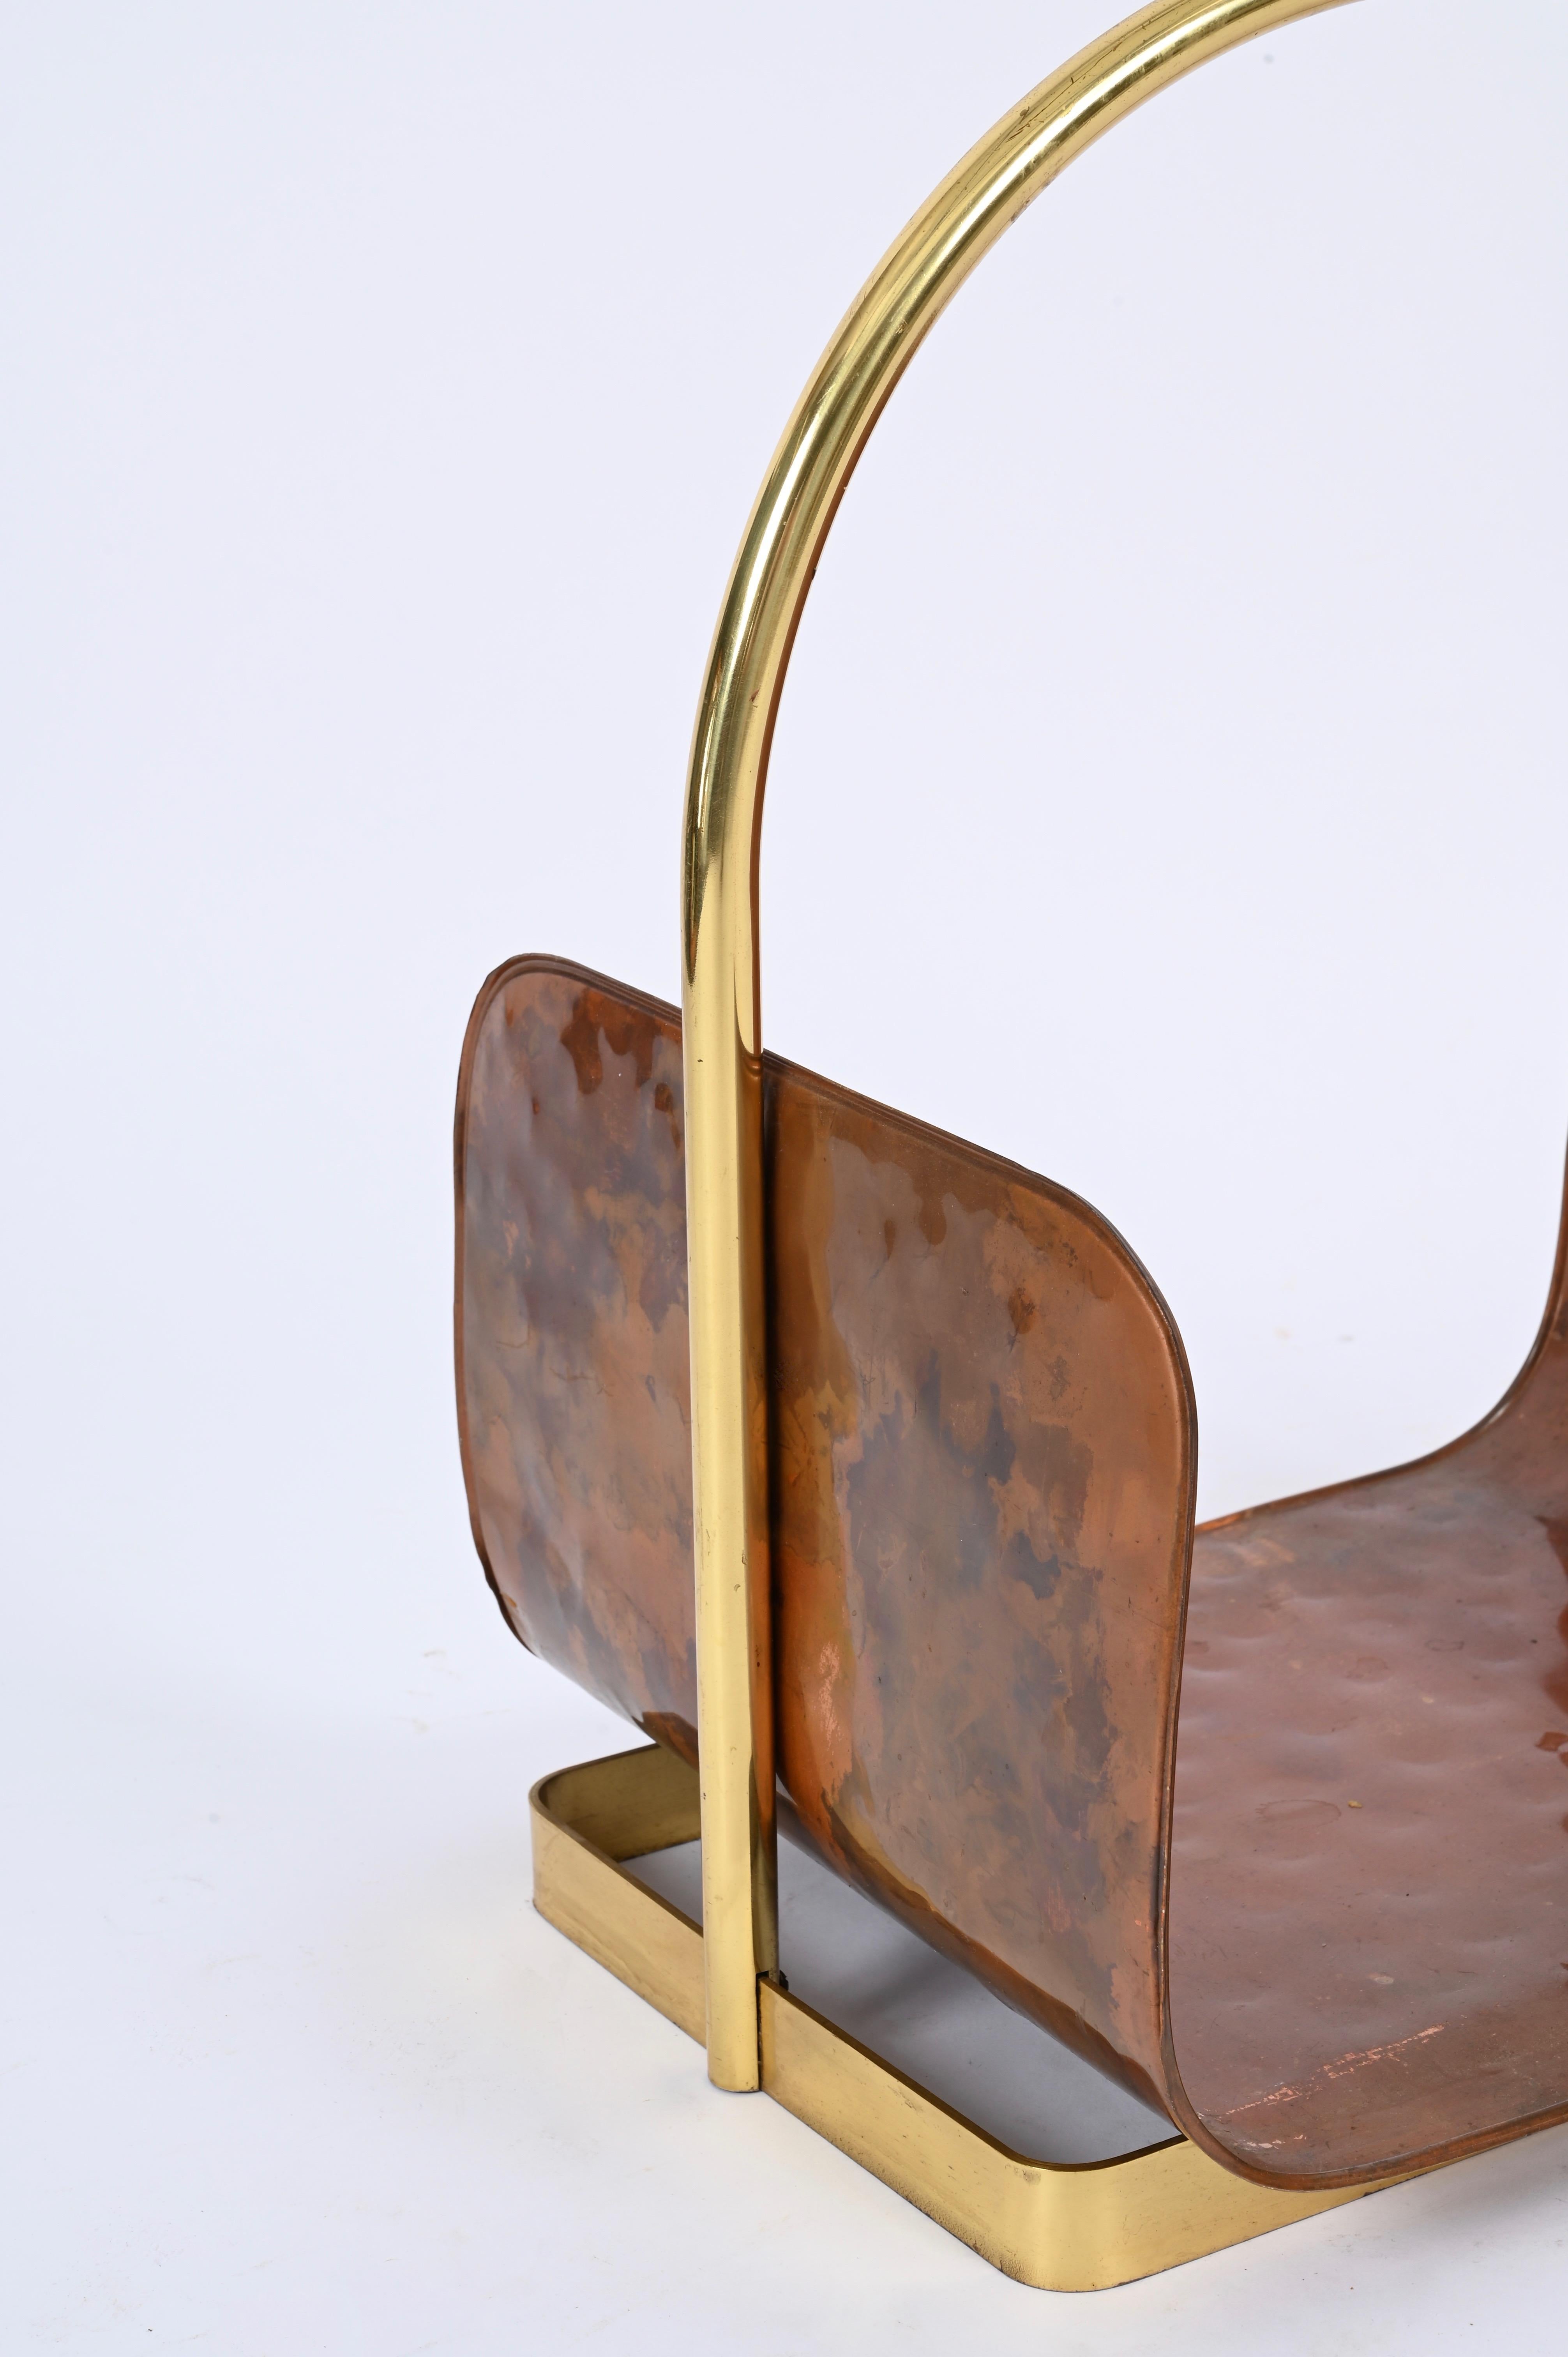 Midcentury Italian Magazine Rack in Hammered Copper and Brass, Italy 1970s For Sale 10